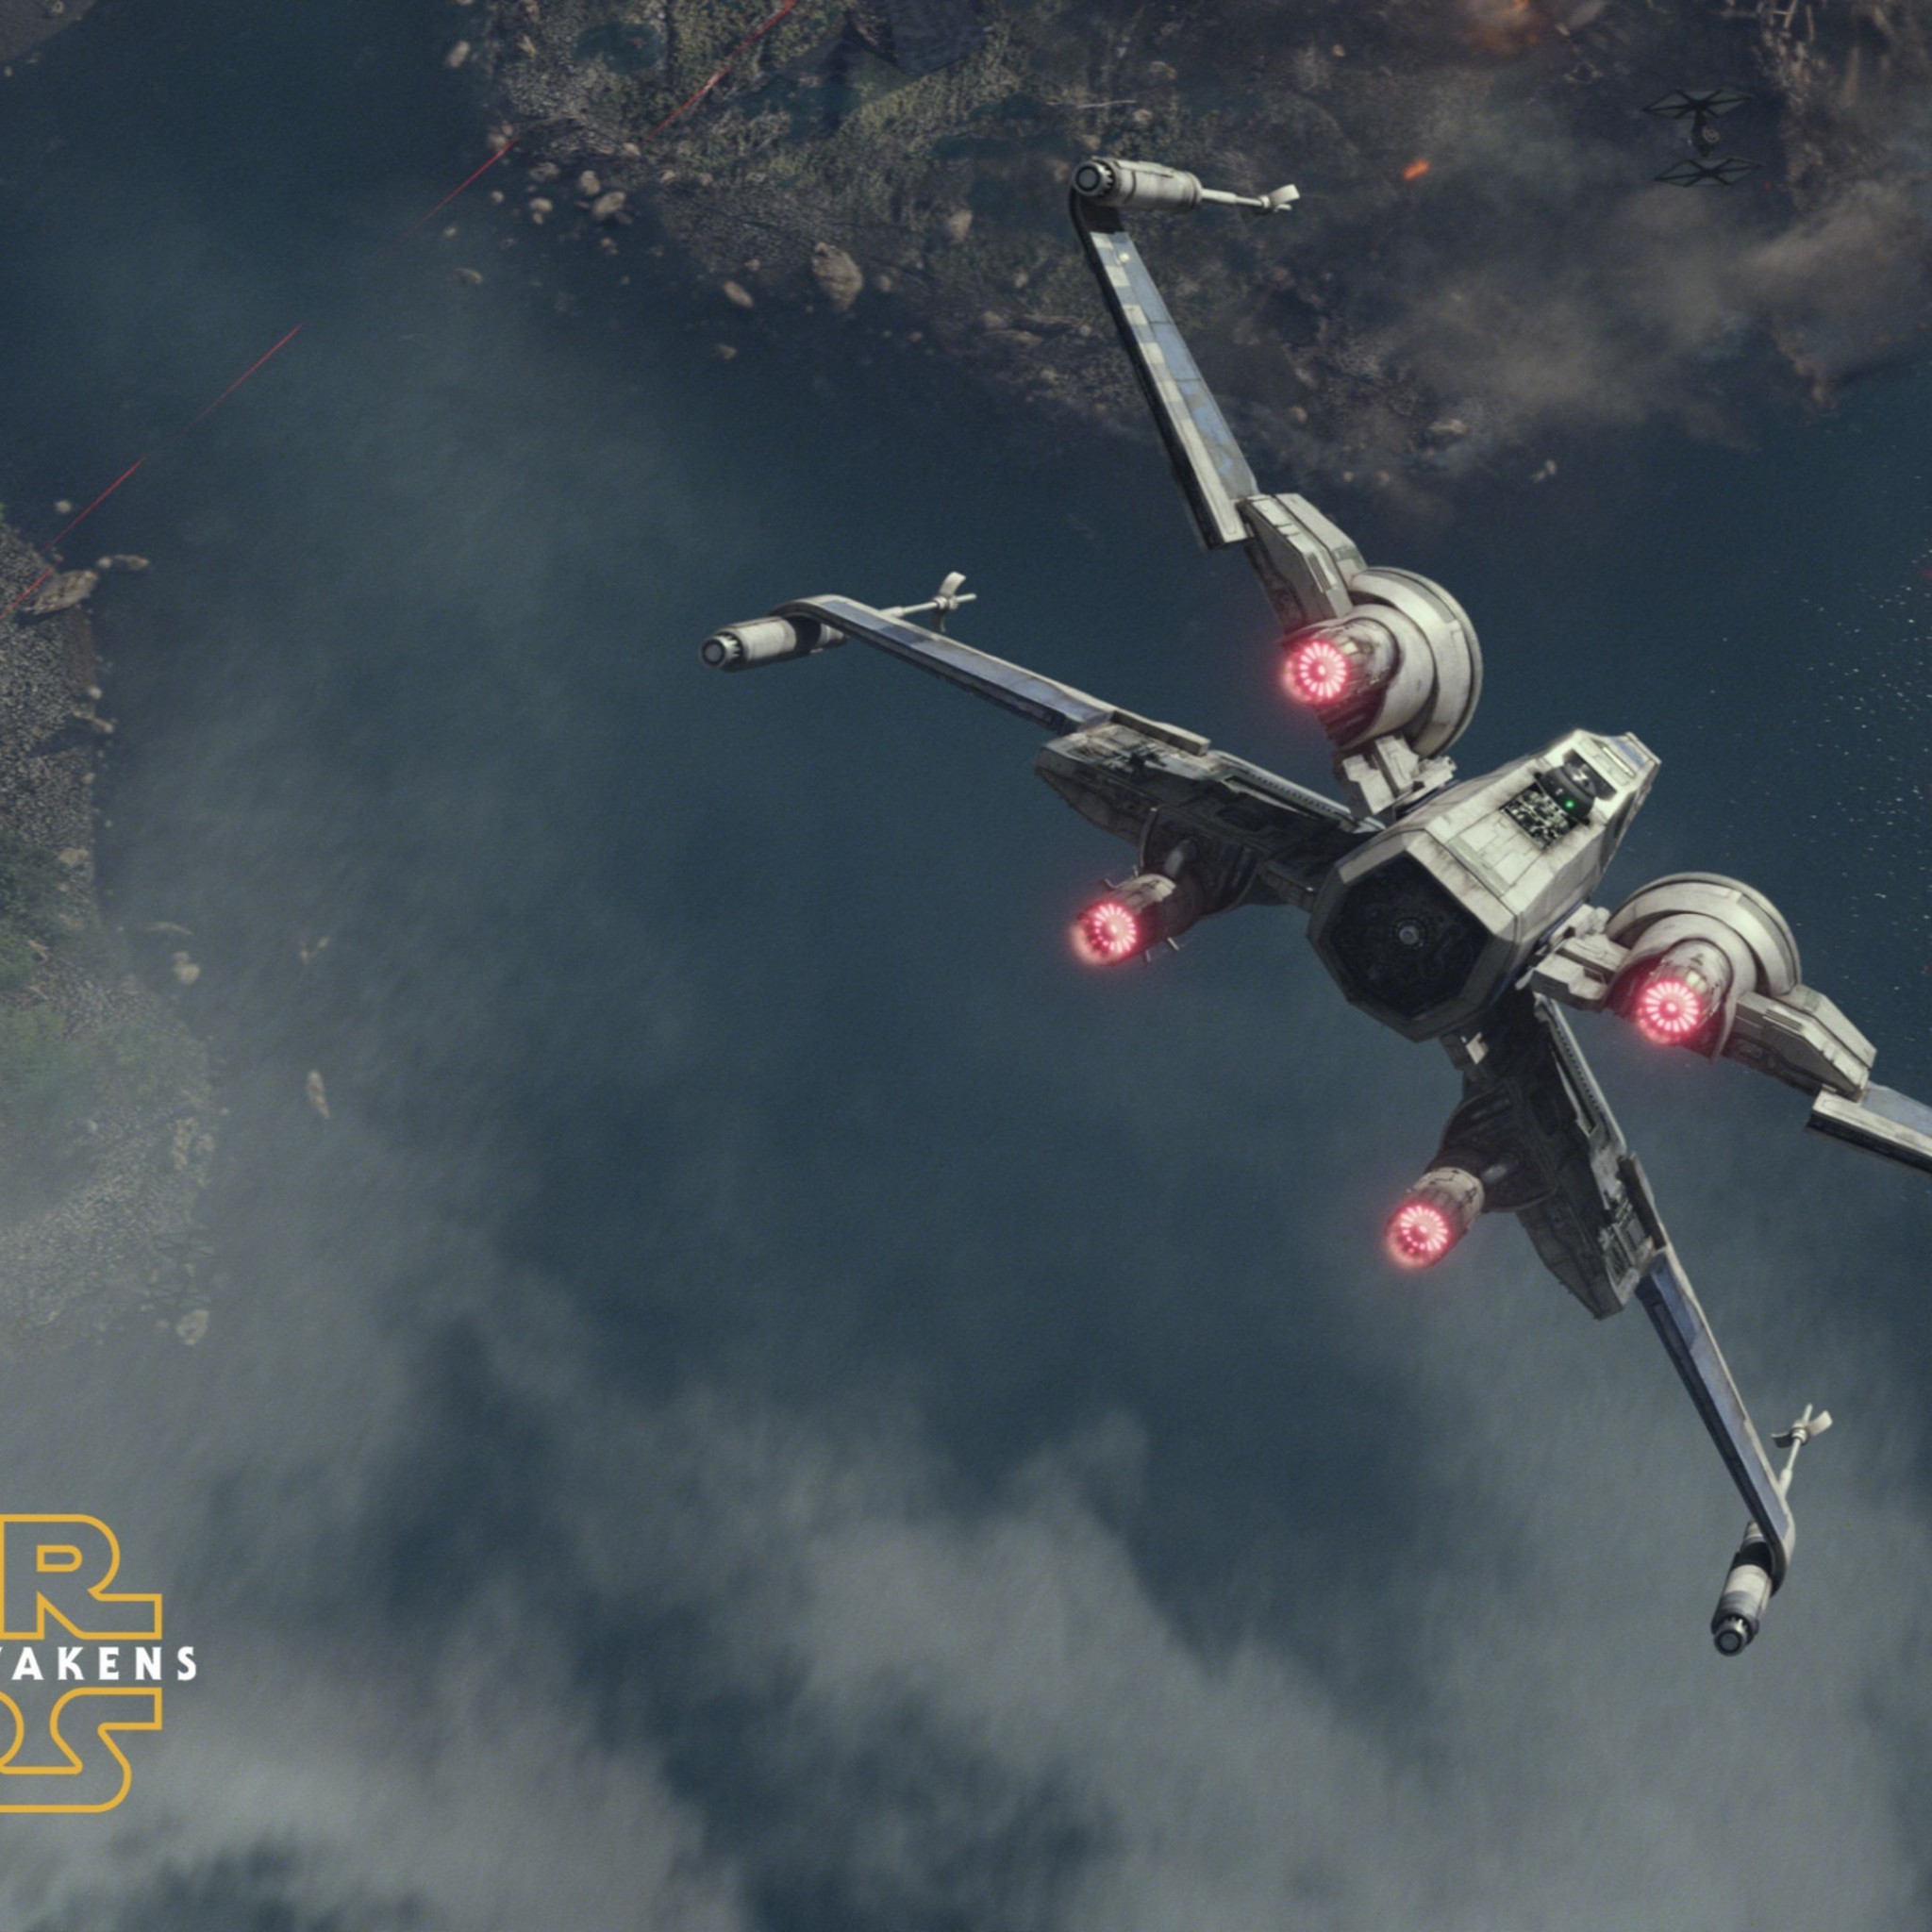 Best X Wing Fighter Star Wars The Force Awakens 4K Wallpaper Best Games Wallpapers Pinterest Wibbly wobbly timey wimey and Starwars